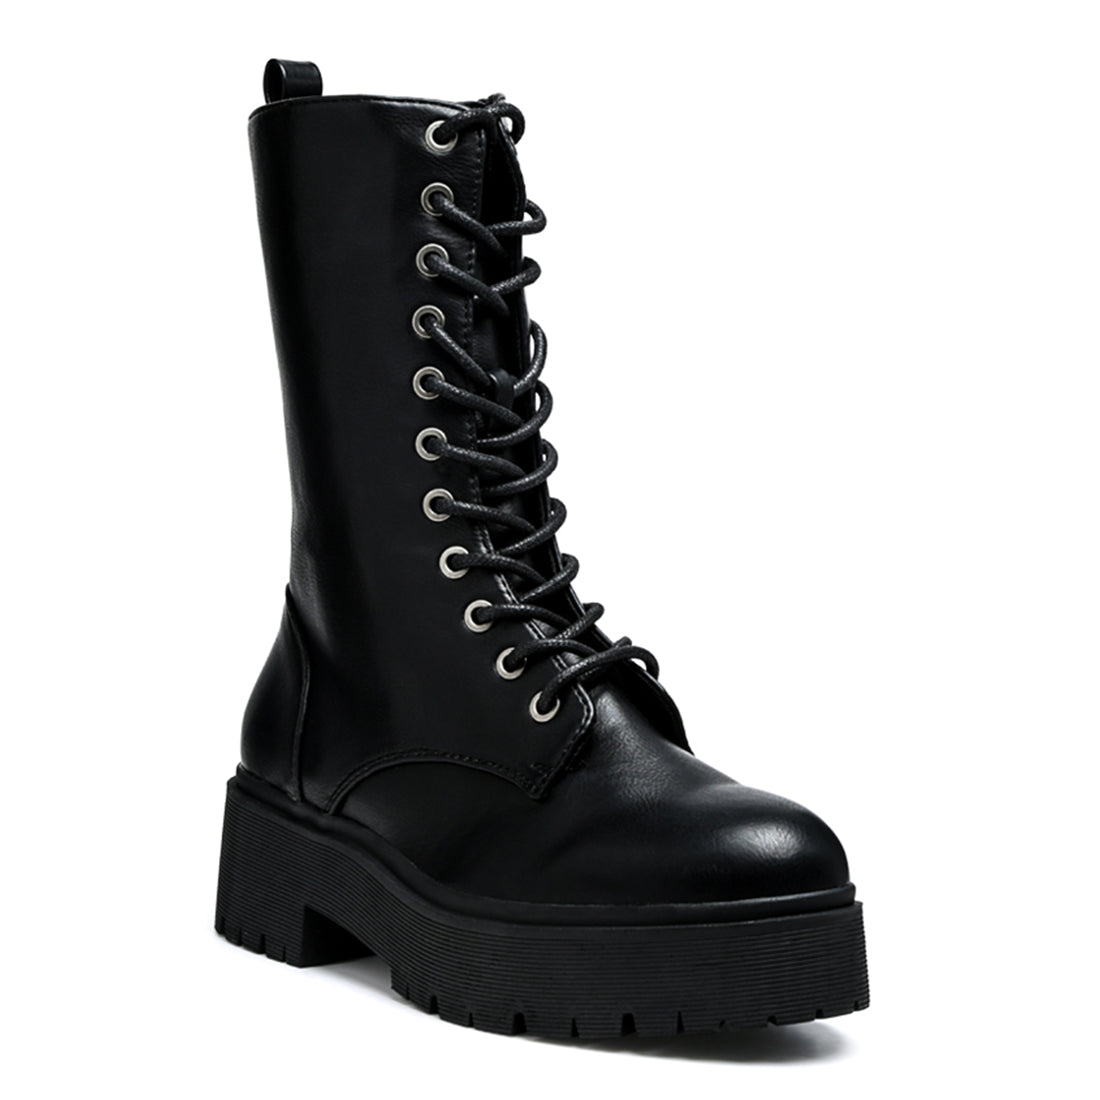 Over the Ankle Lace-Up Biker Boot - Black